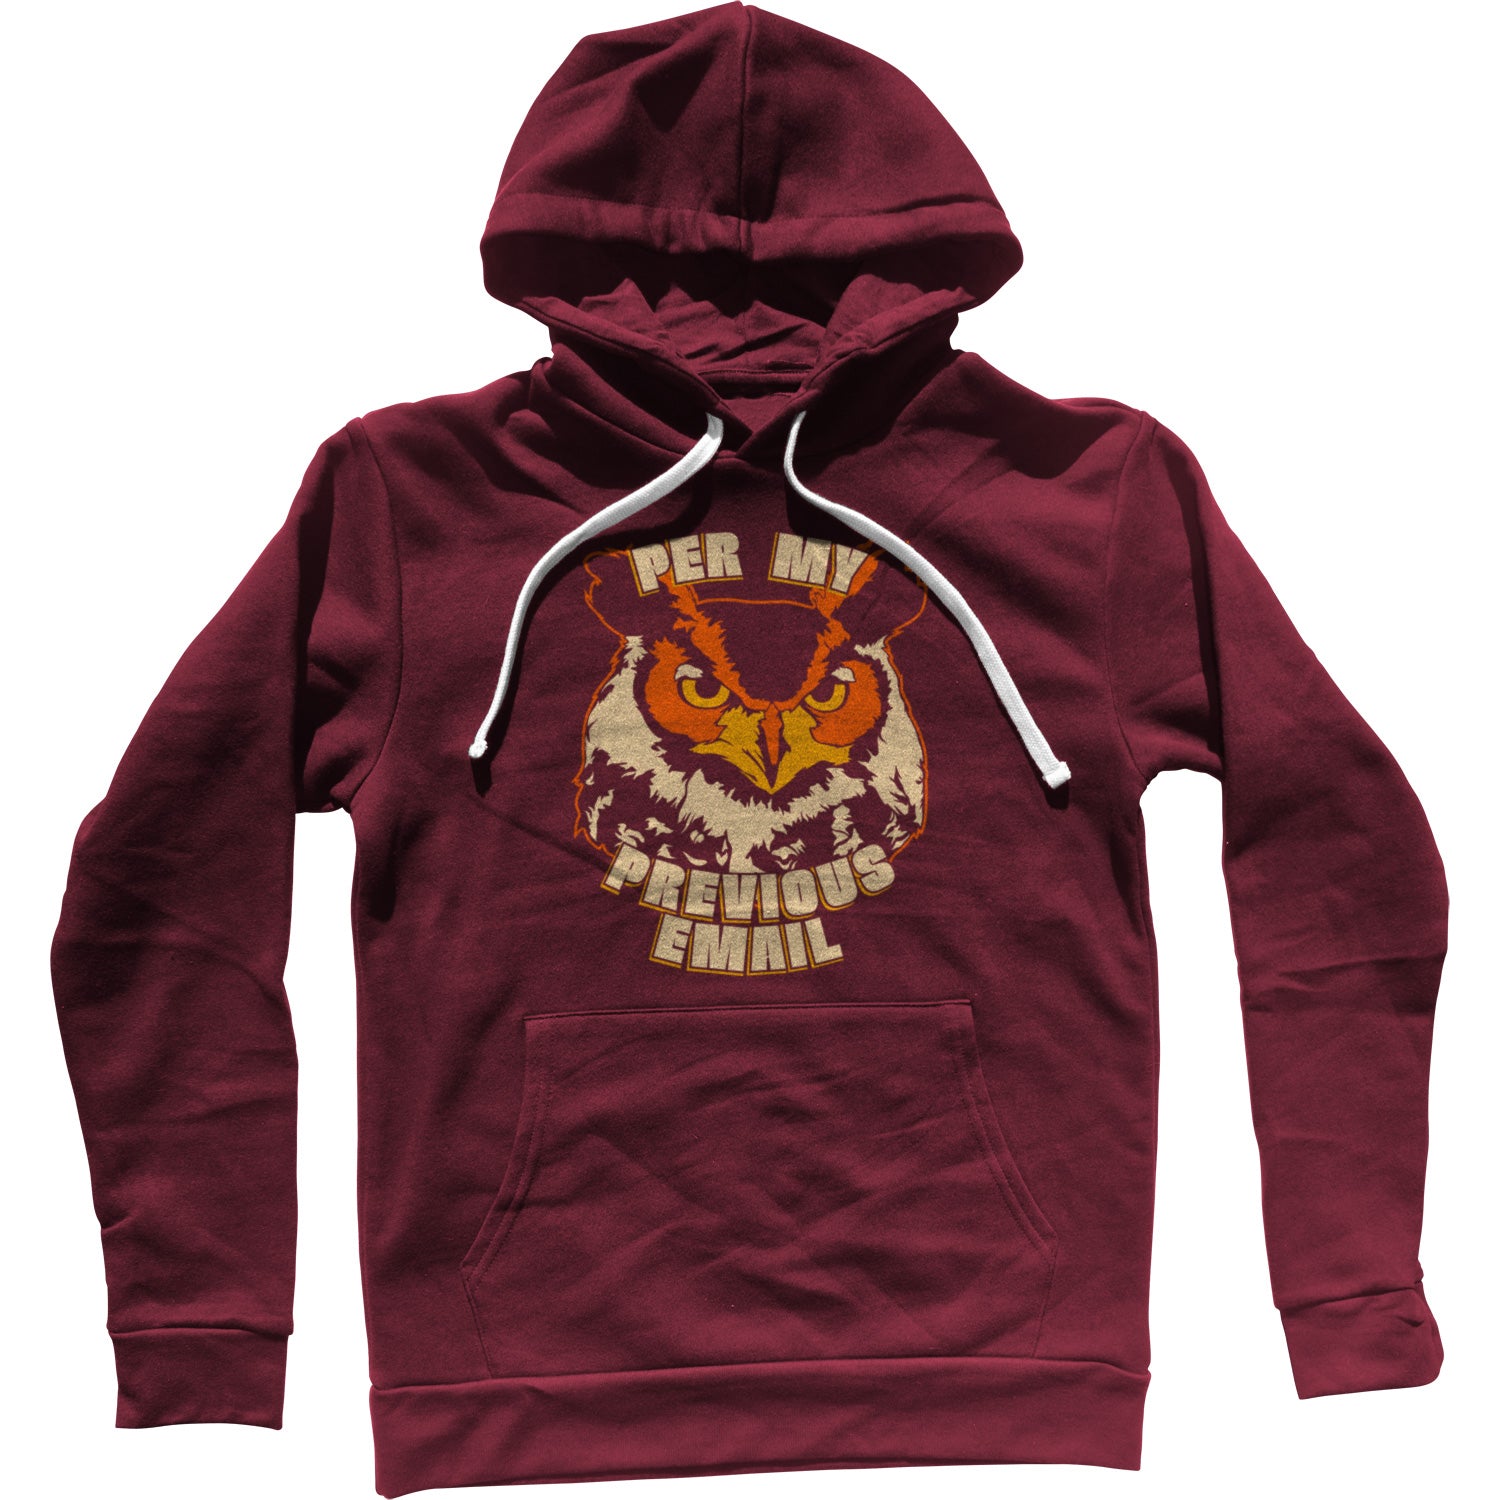 Per My Previous Email Owl Unisex Hoodie